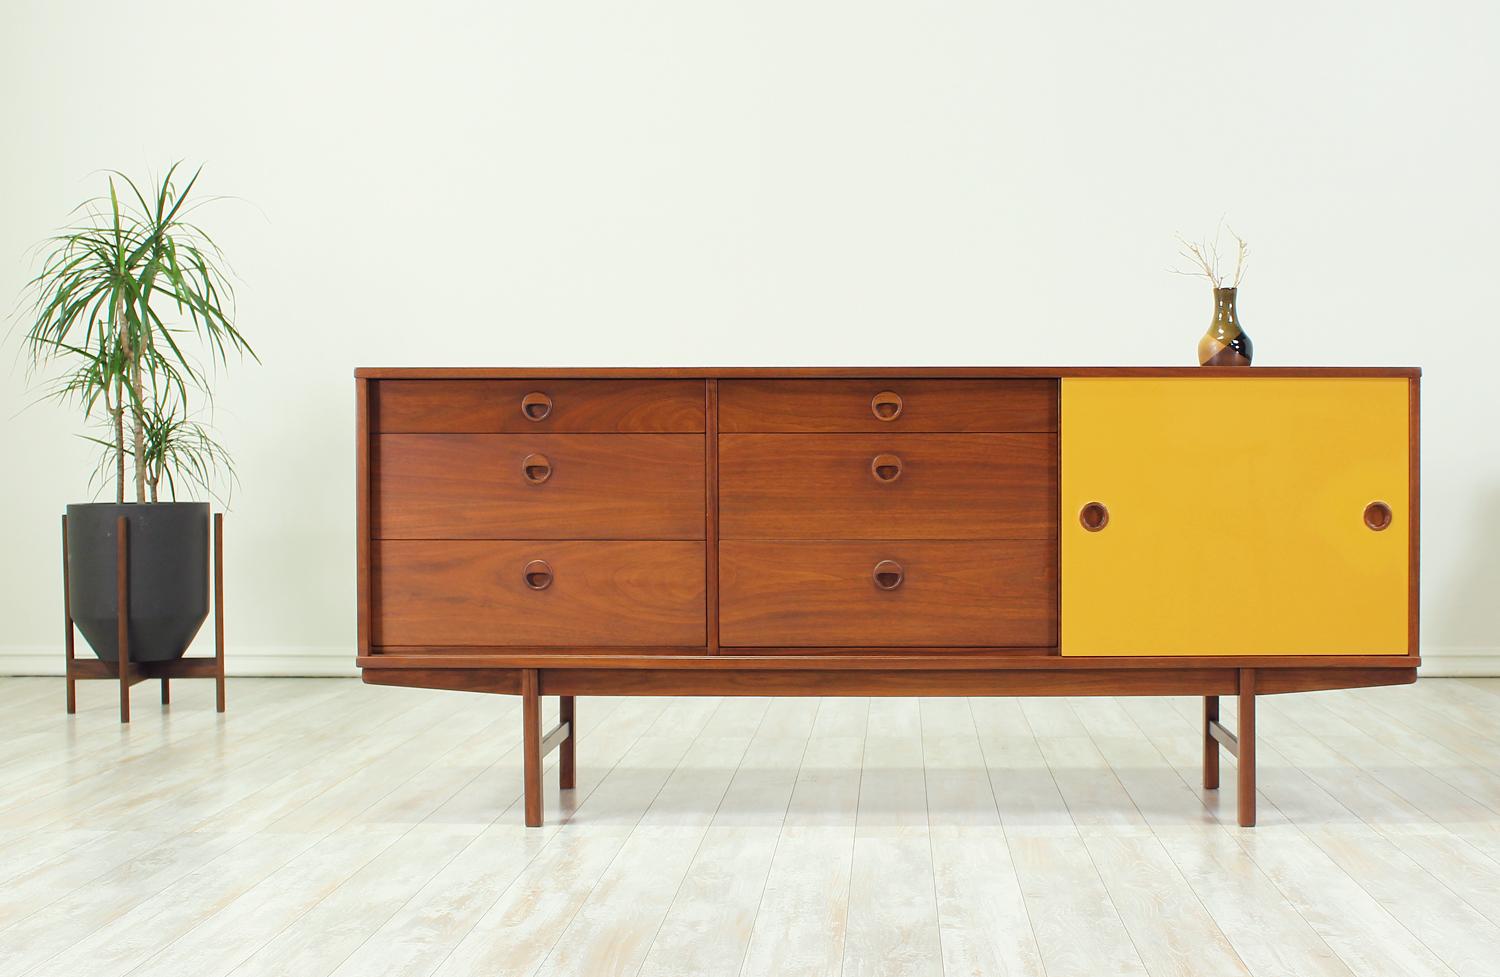 Scandinavian Modern credenza designed by Yngve Ekstrom for Dux of Sweden circa 1950s. The model 504 has been crafted in walnut wood and features six dovetailed drawers on the left side and a shelved compartment hidden behind a sliding mustard-yellow